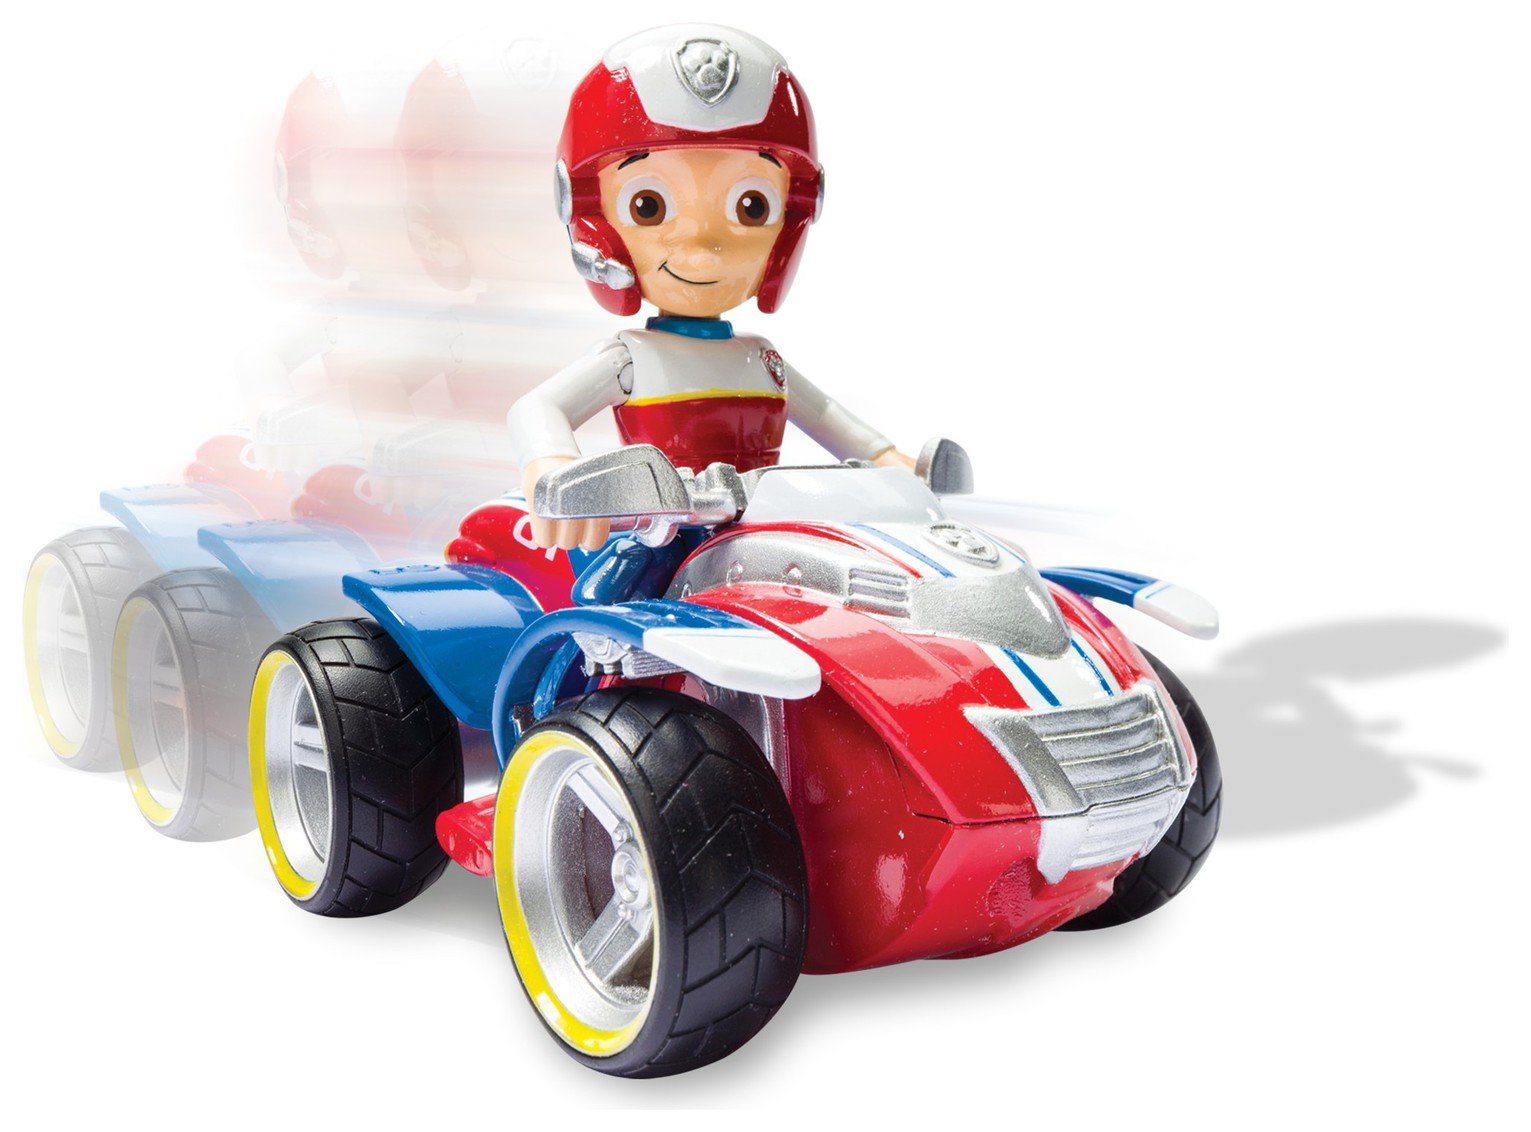 PAW Patrol Ryder's Rescue ATV Pup & Vehicle Review